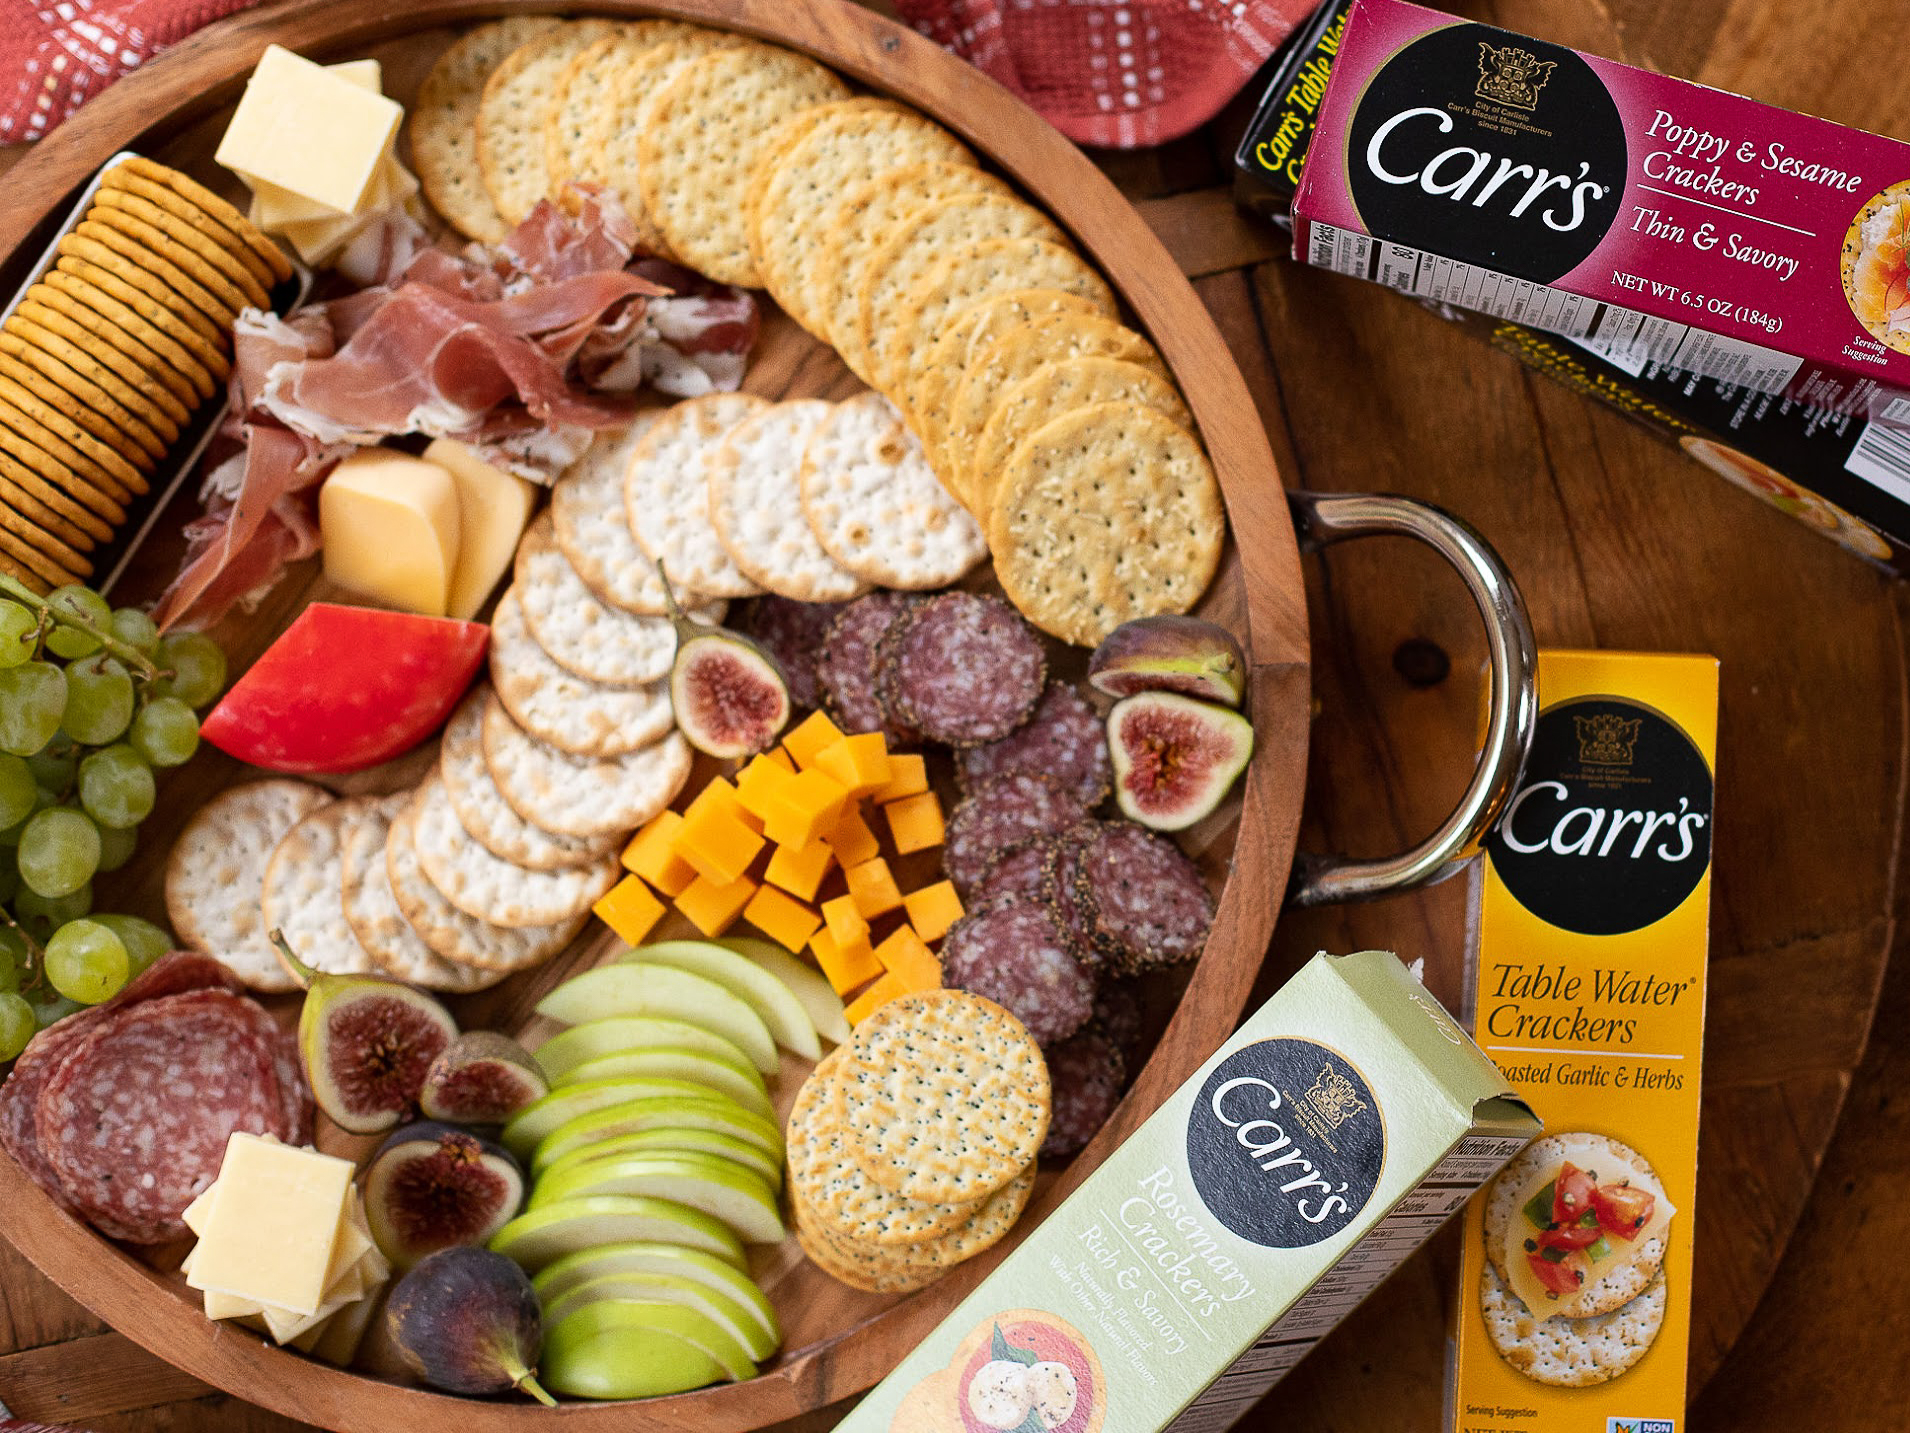 Cant Miss Deal On Carr's Crackers & Cookies At Publix - Stock Up For the Holidays! on I Heart Publix